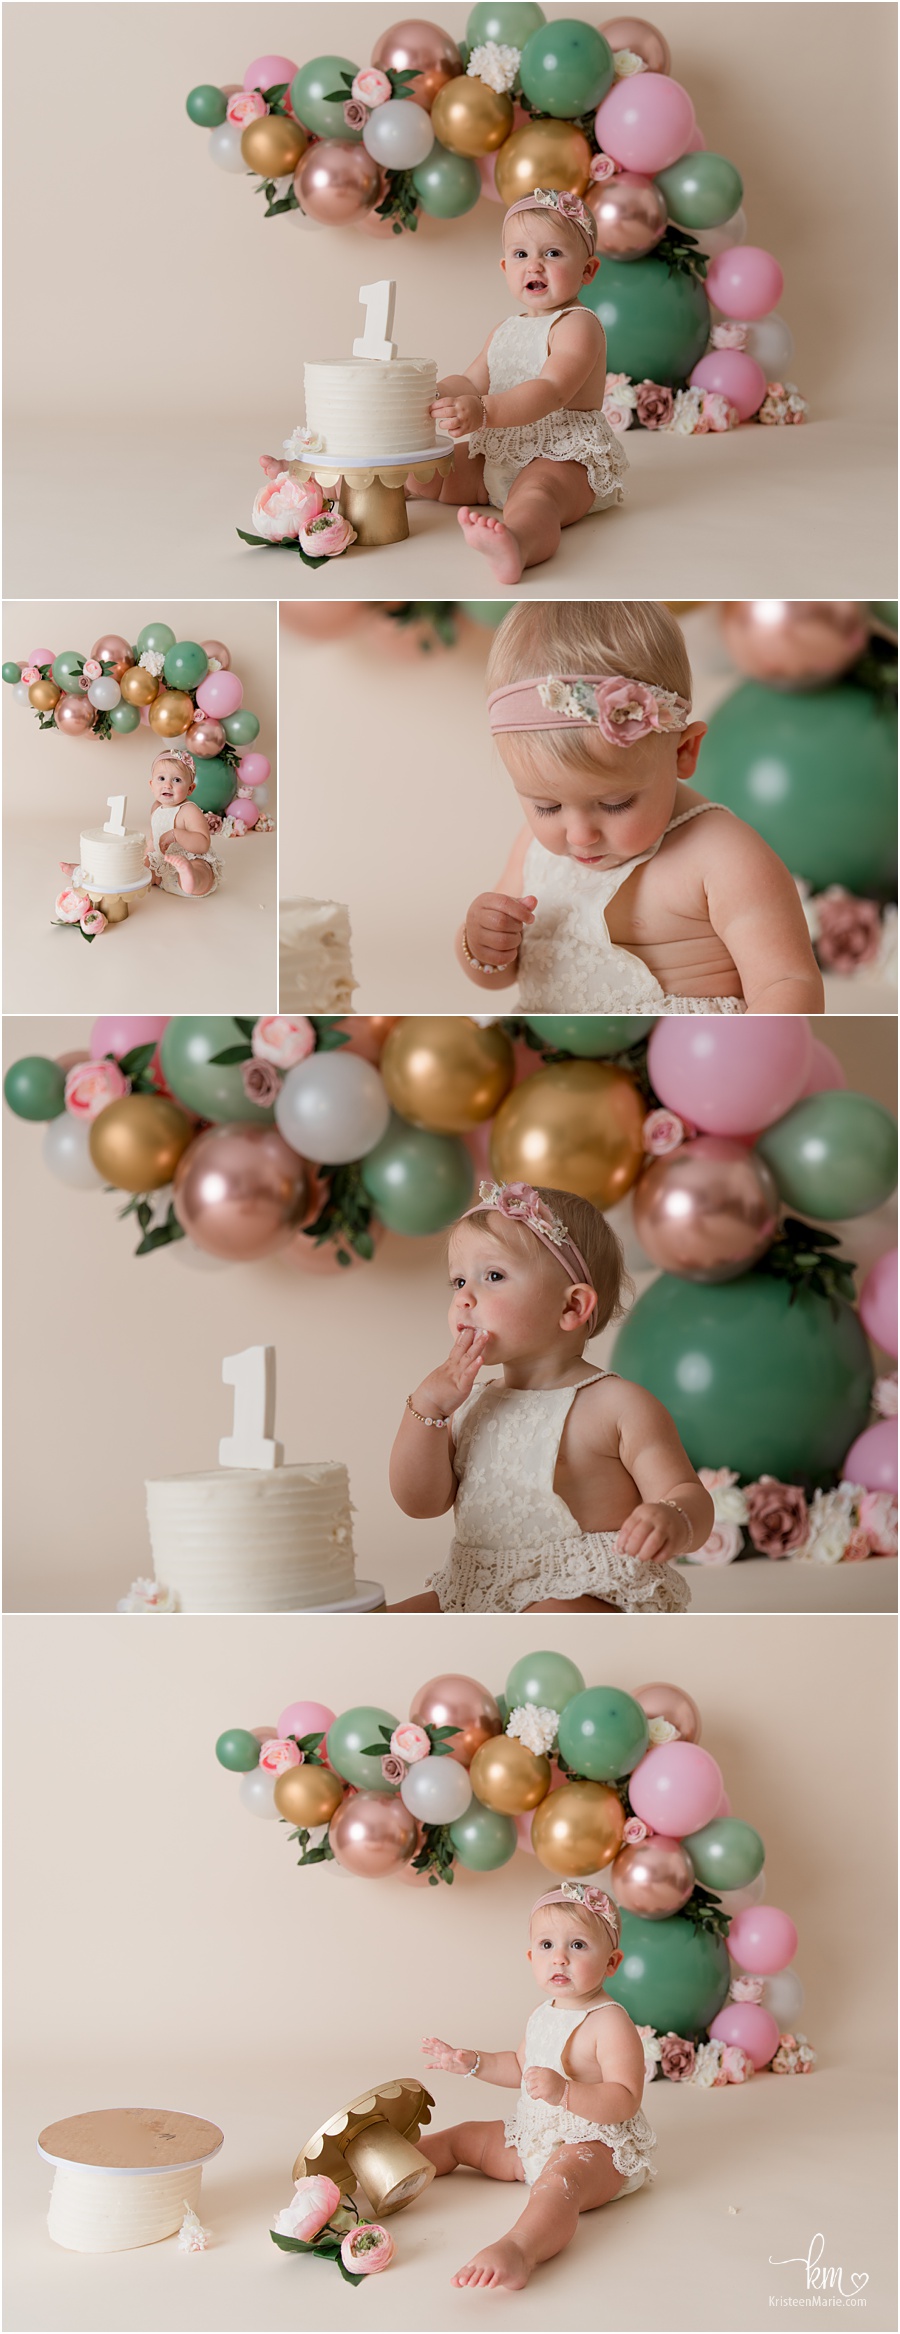  mint, pink, blush, and gold ballon arch for 1st birthday cake smash photography